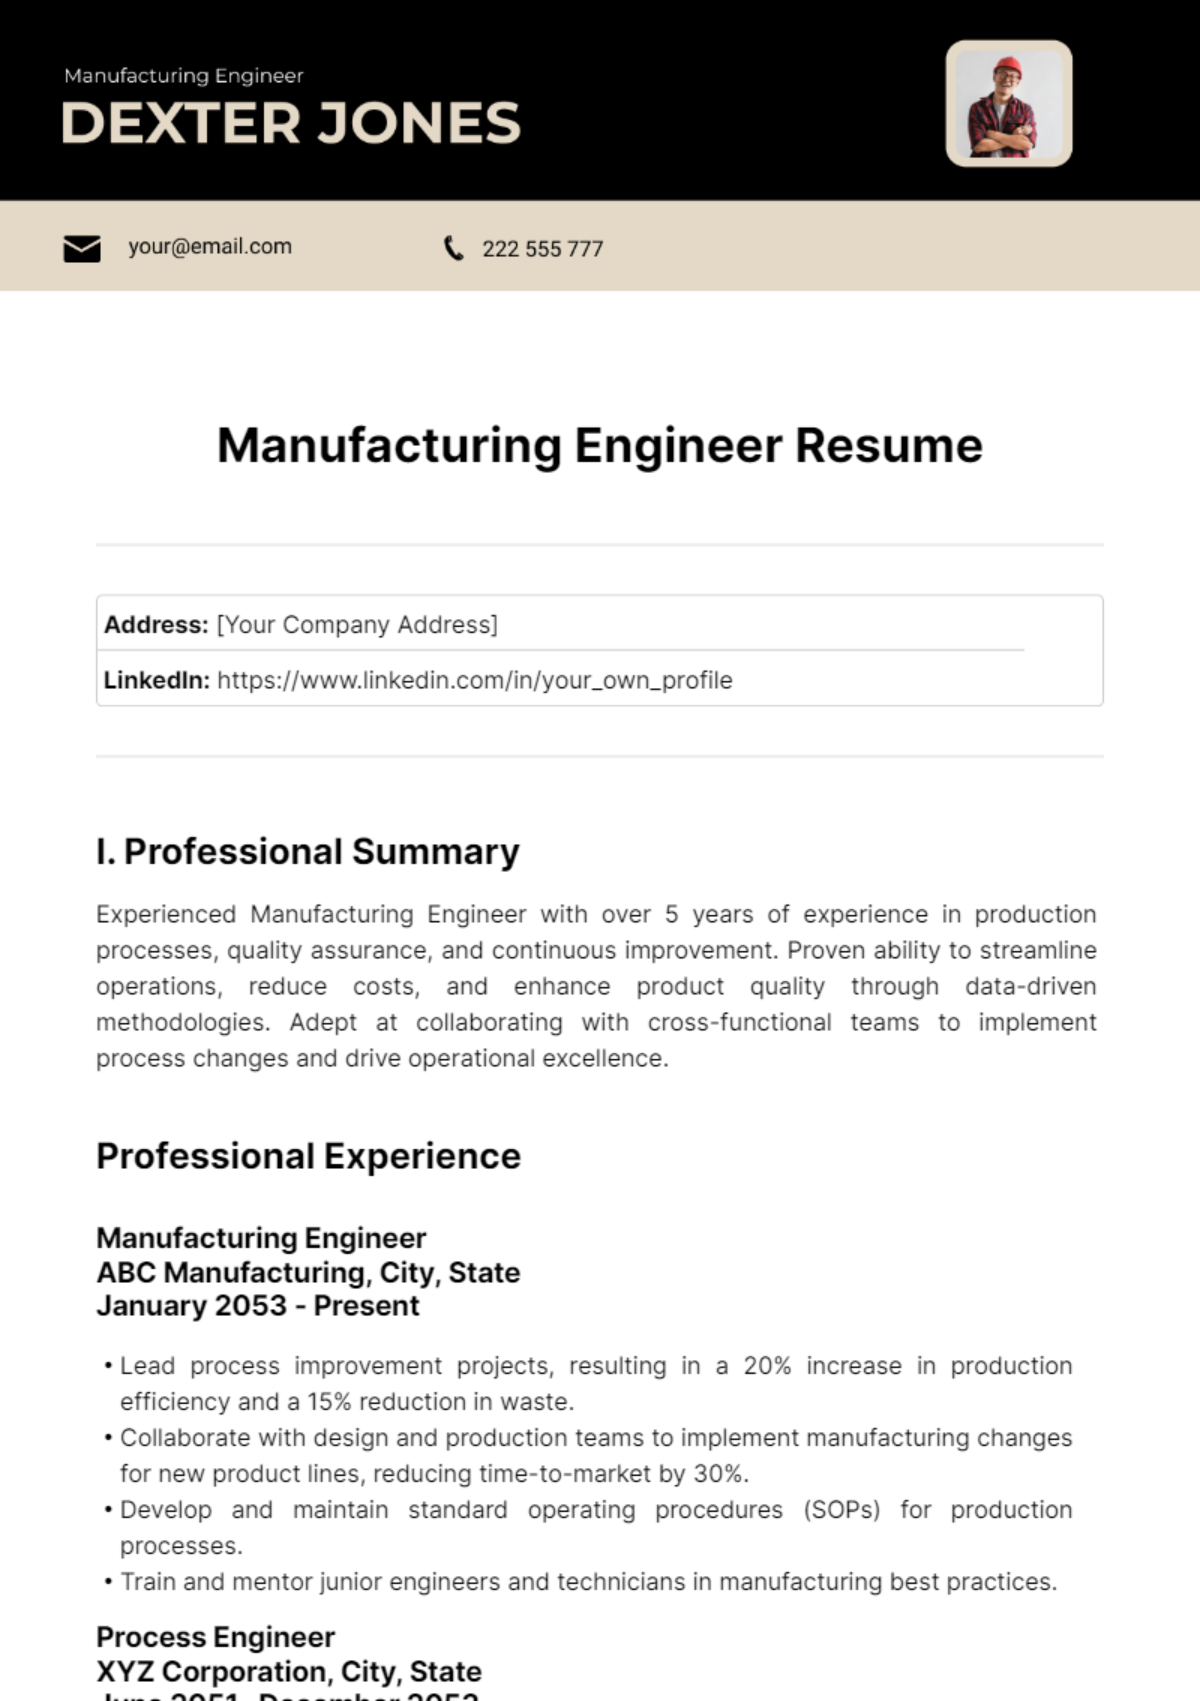 Manufacturing Engineer Resume Template